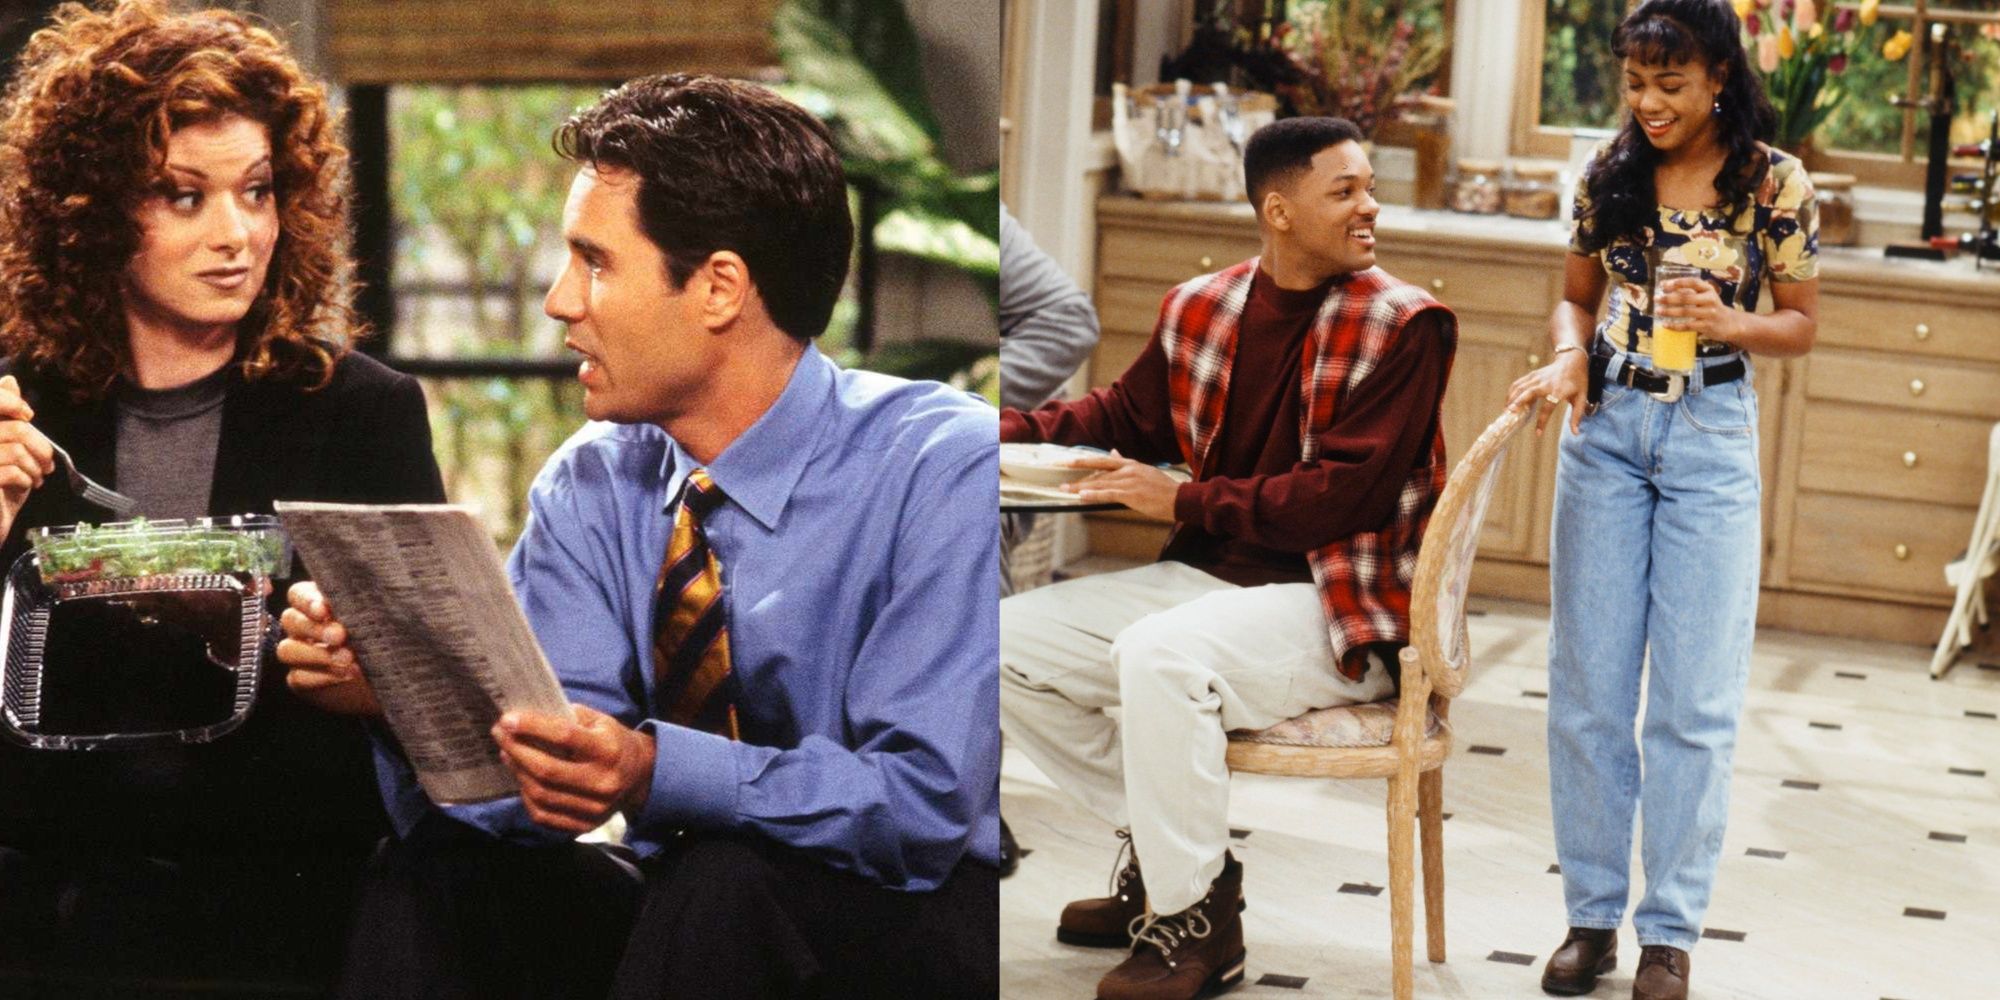 Split Image of Will and Grace, and Will and Katie Fresh Prince of Bel Air